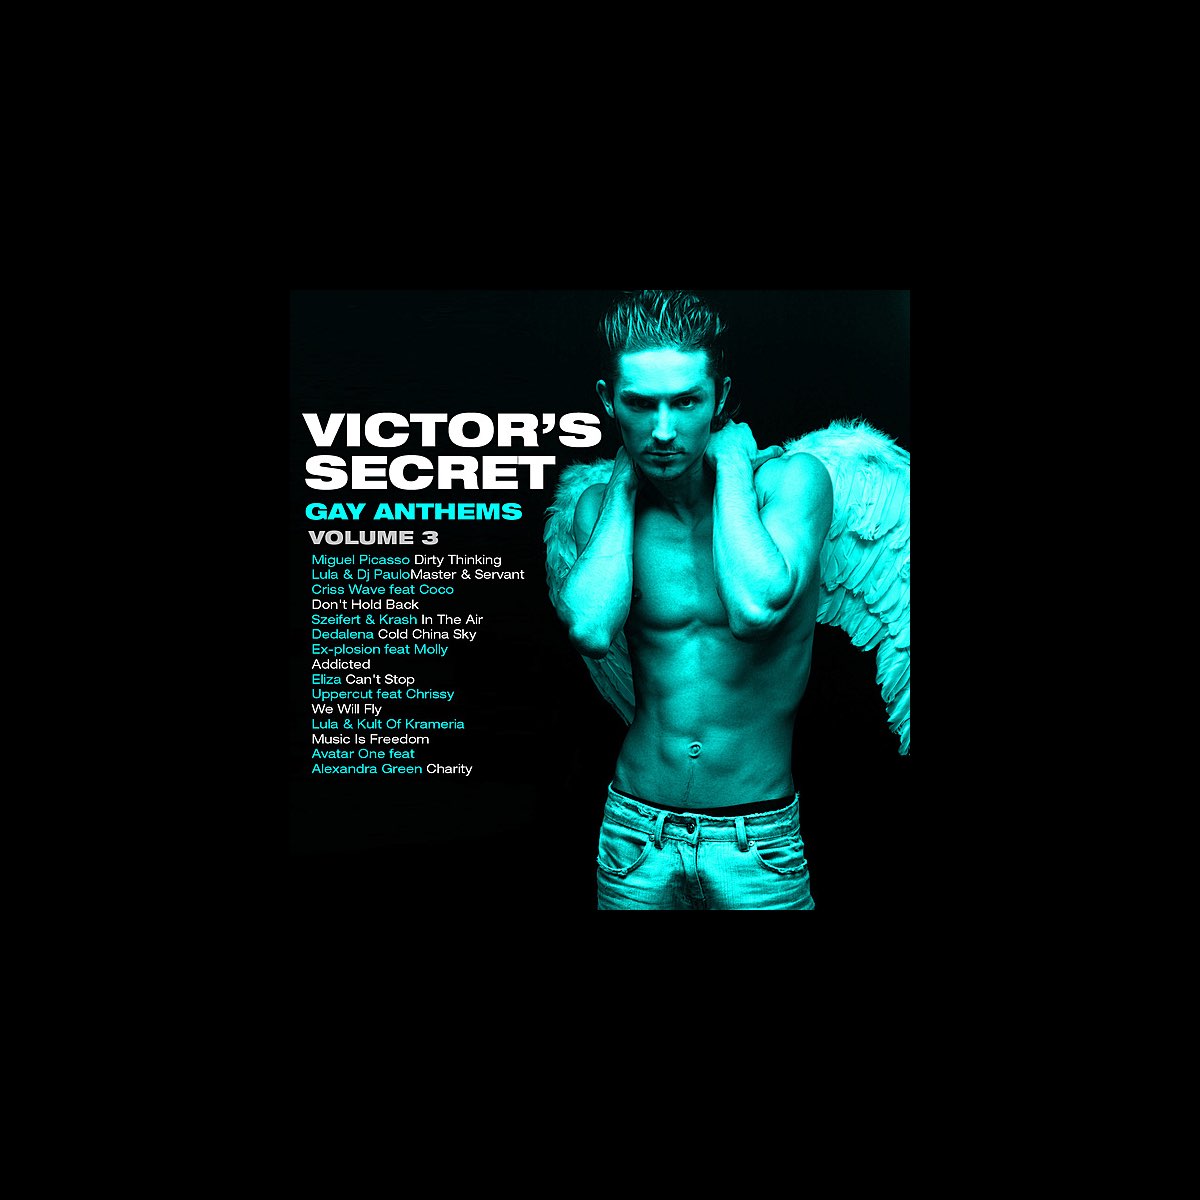 Victor's Secret (Gay Anthems), Vol. 3 by Various Artists on Apple Music